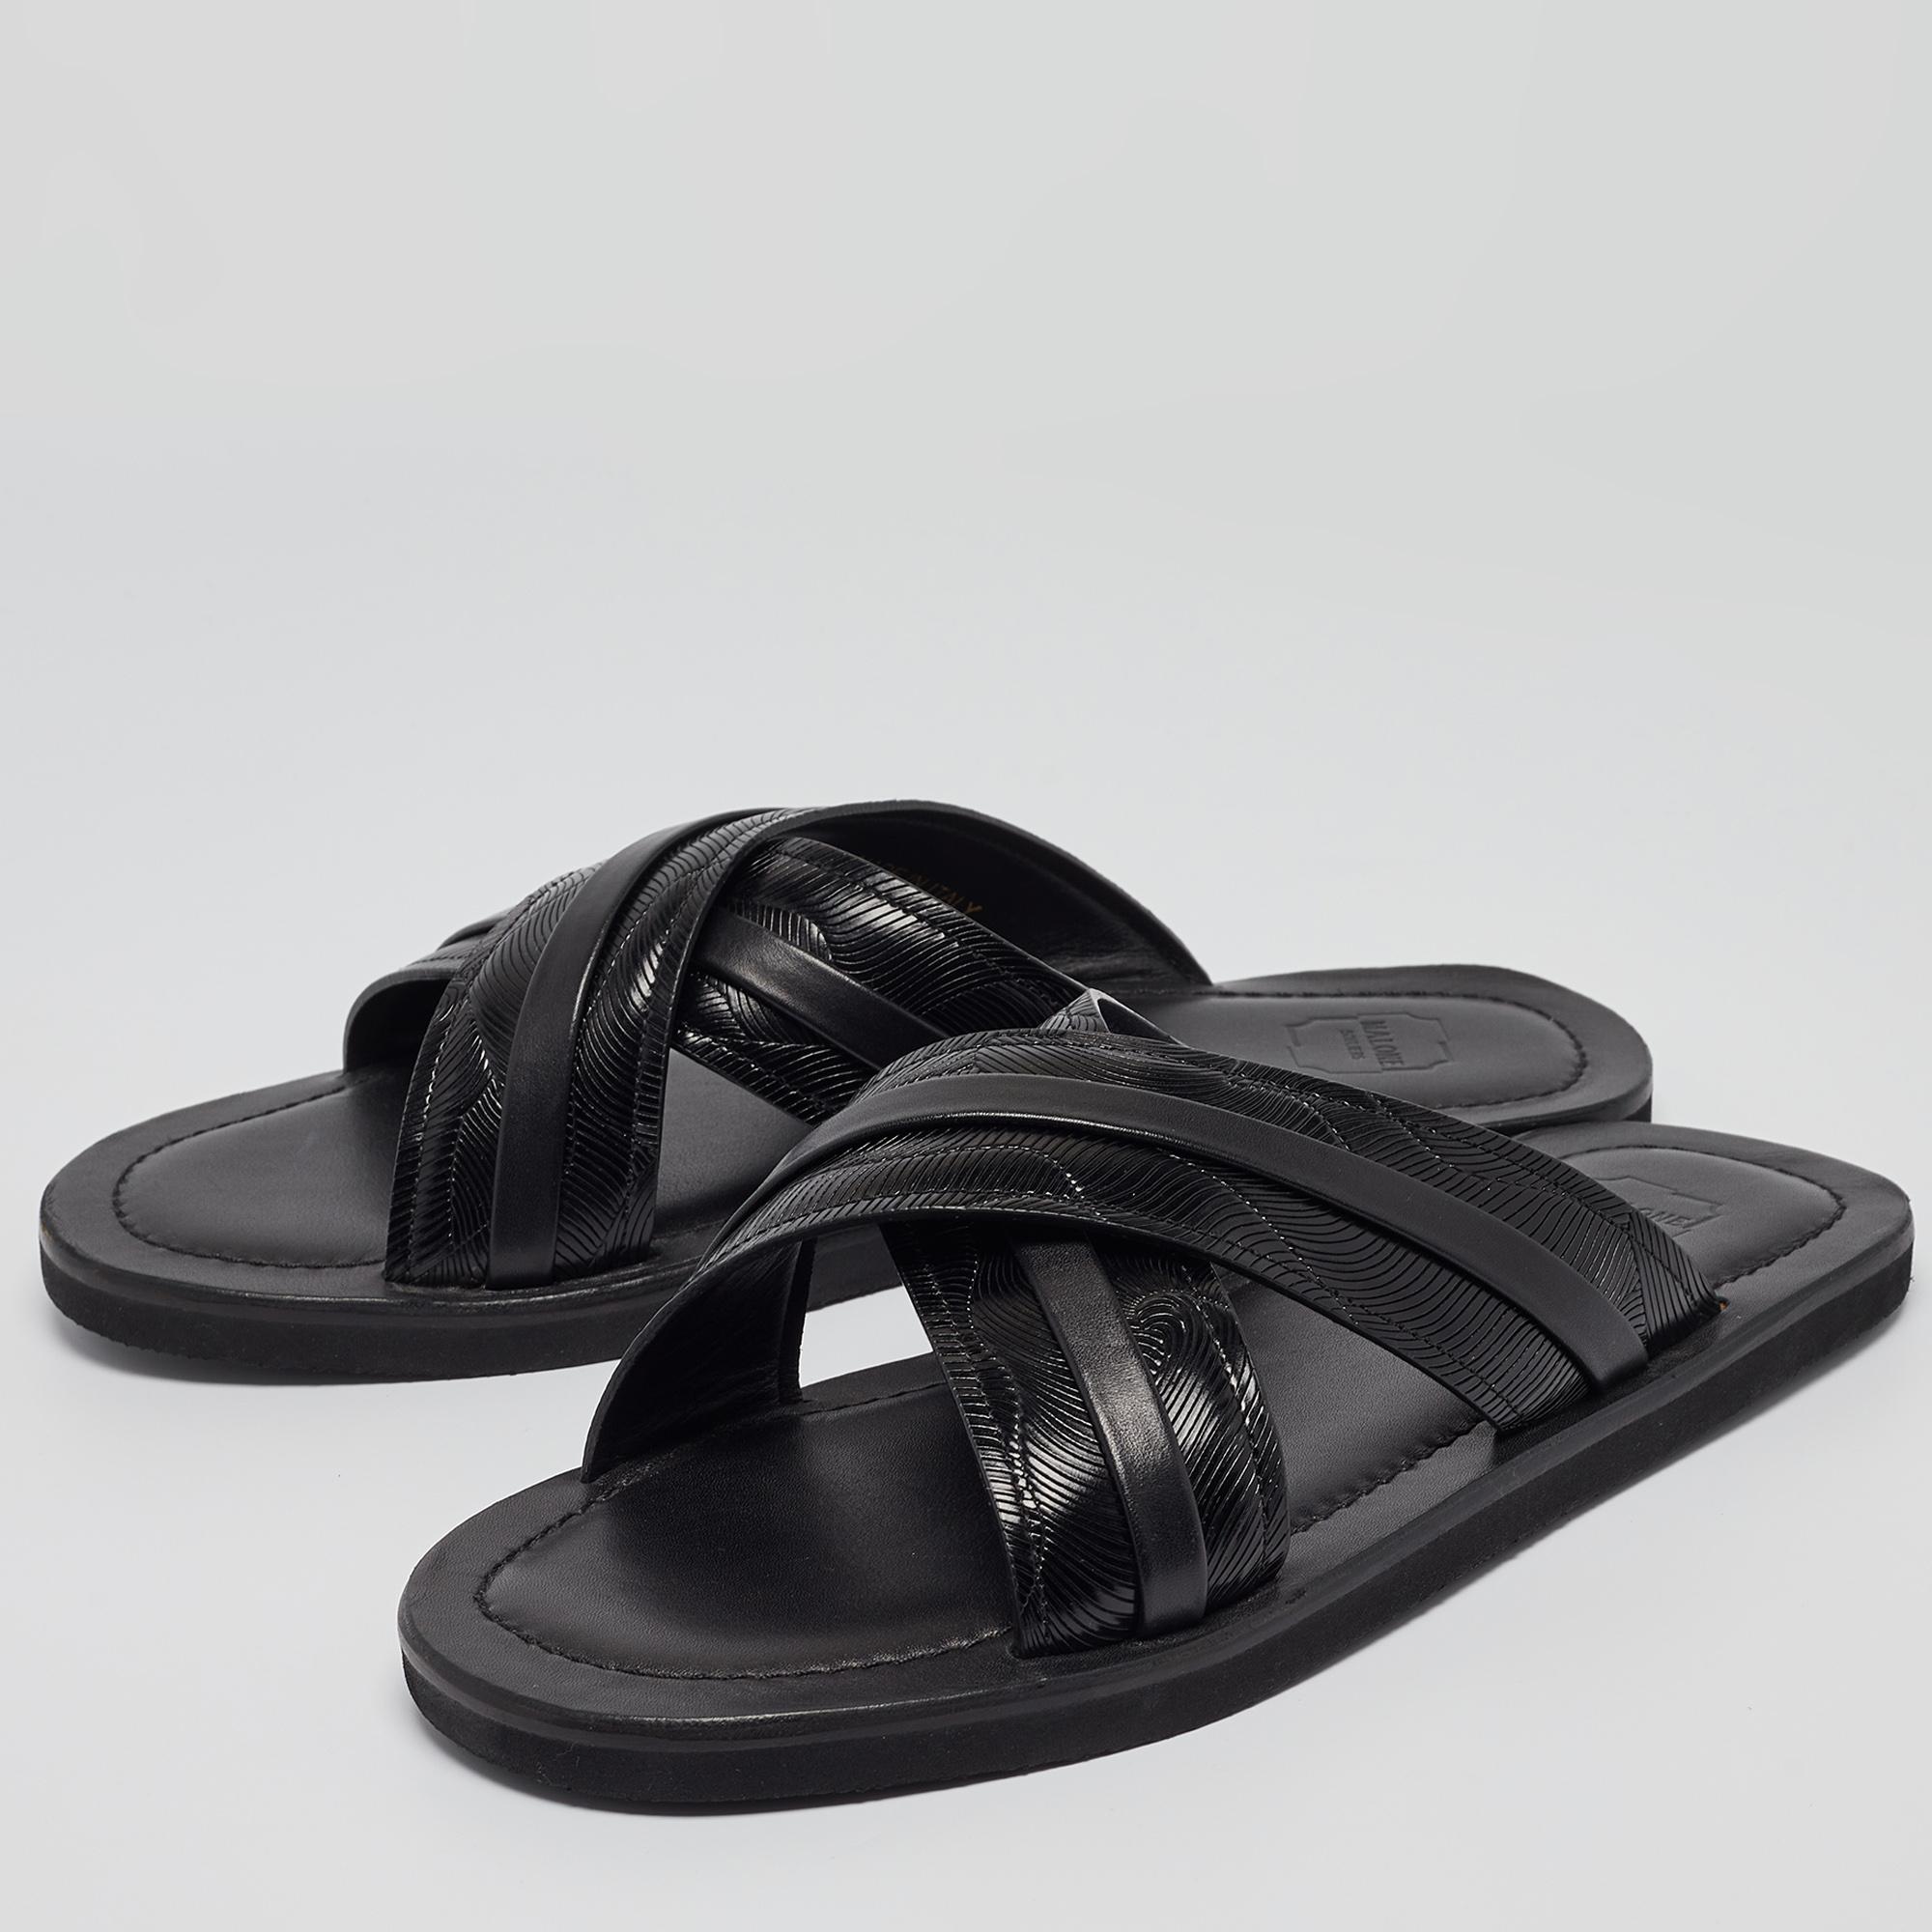 Malone Souliers Black Textured Leather Slides Size 43 For Sale 4